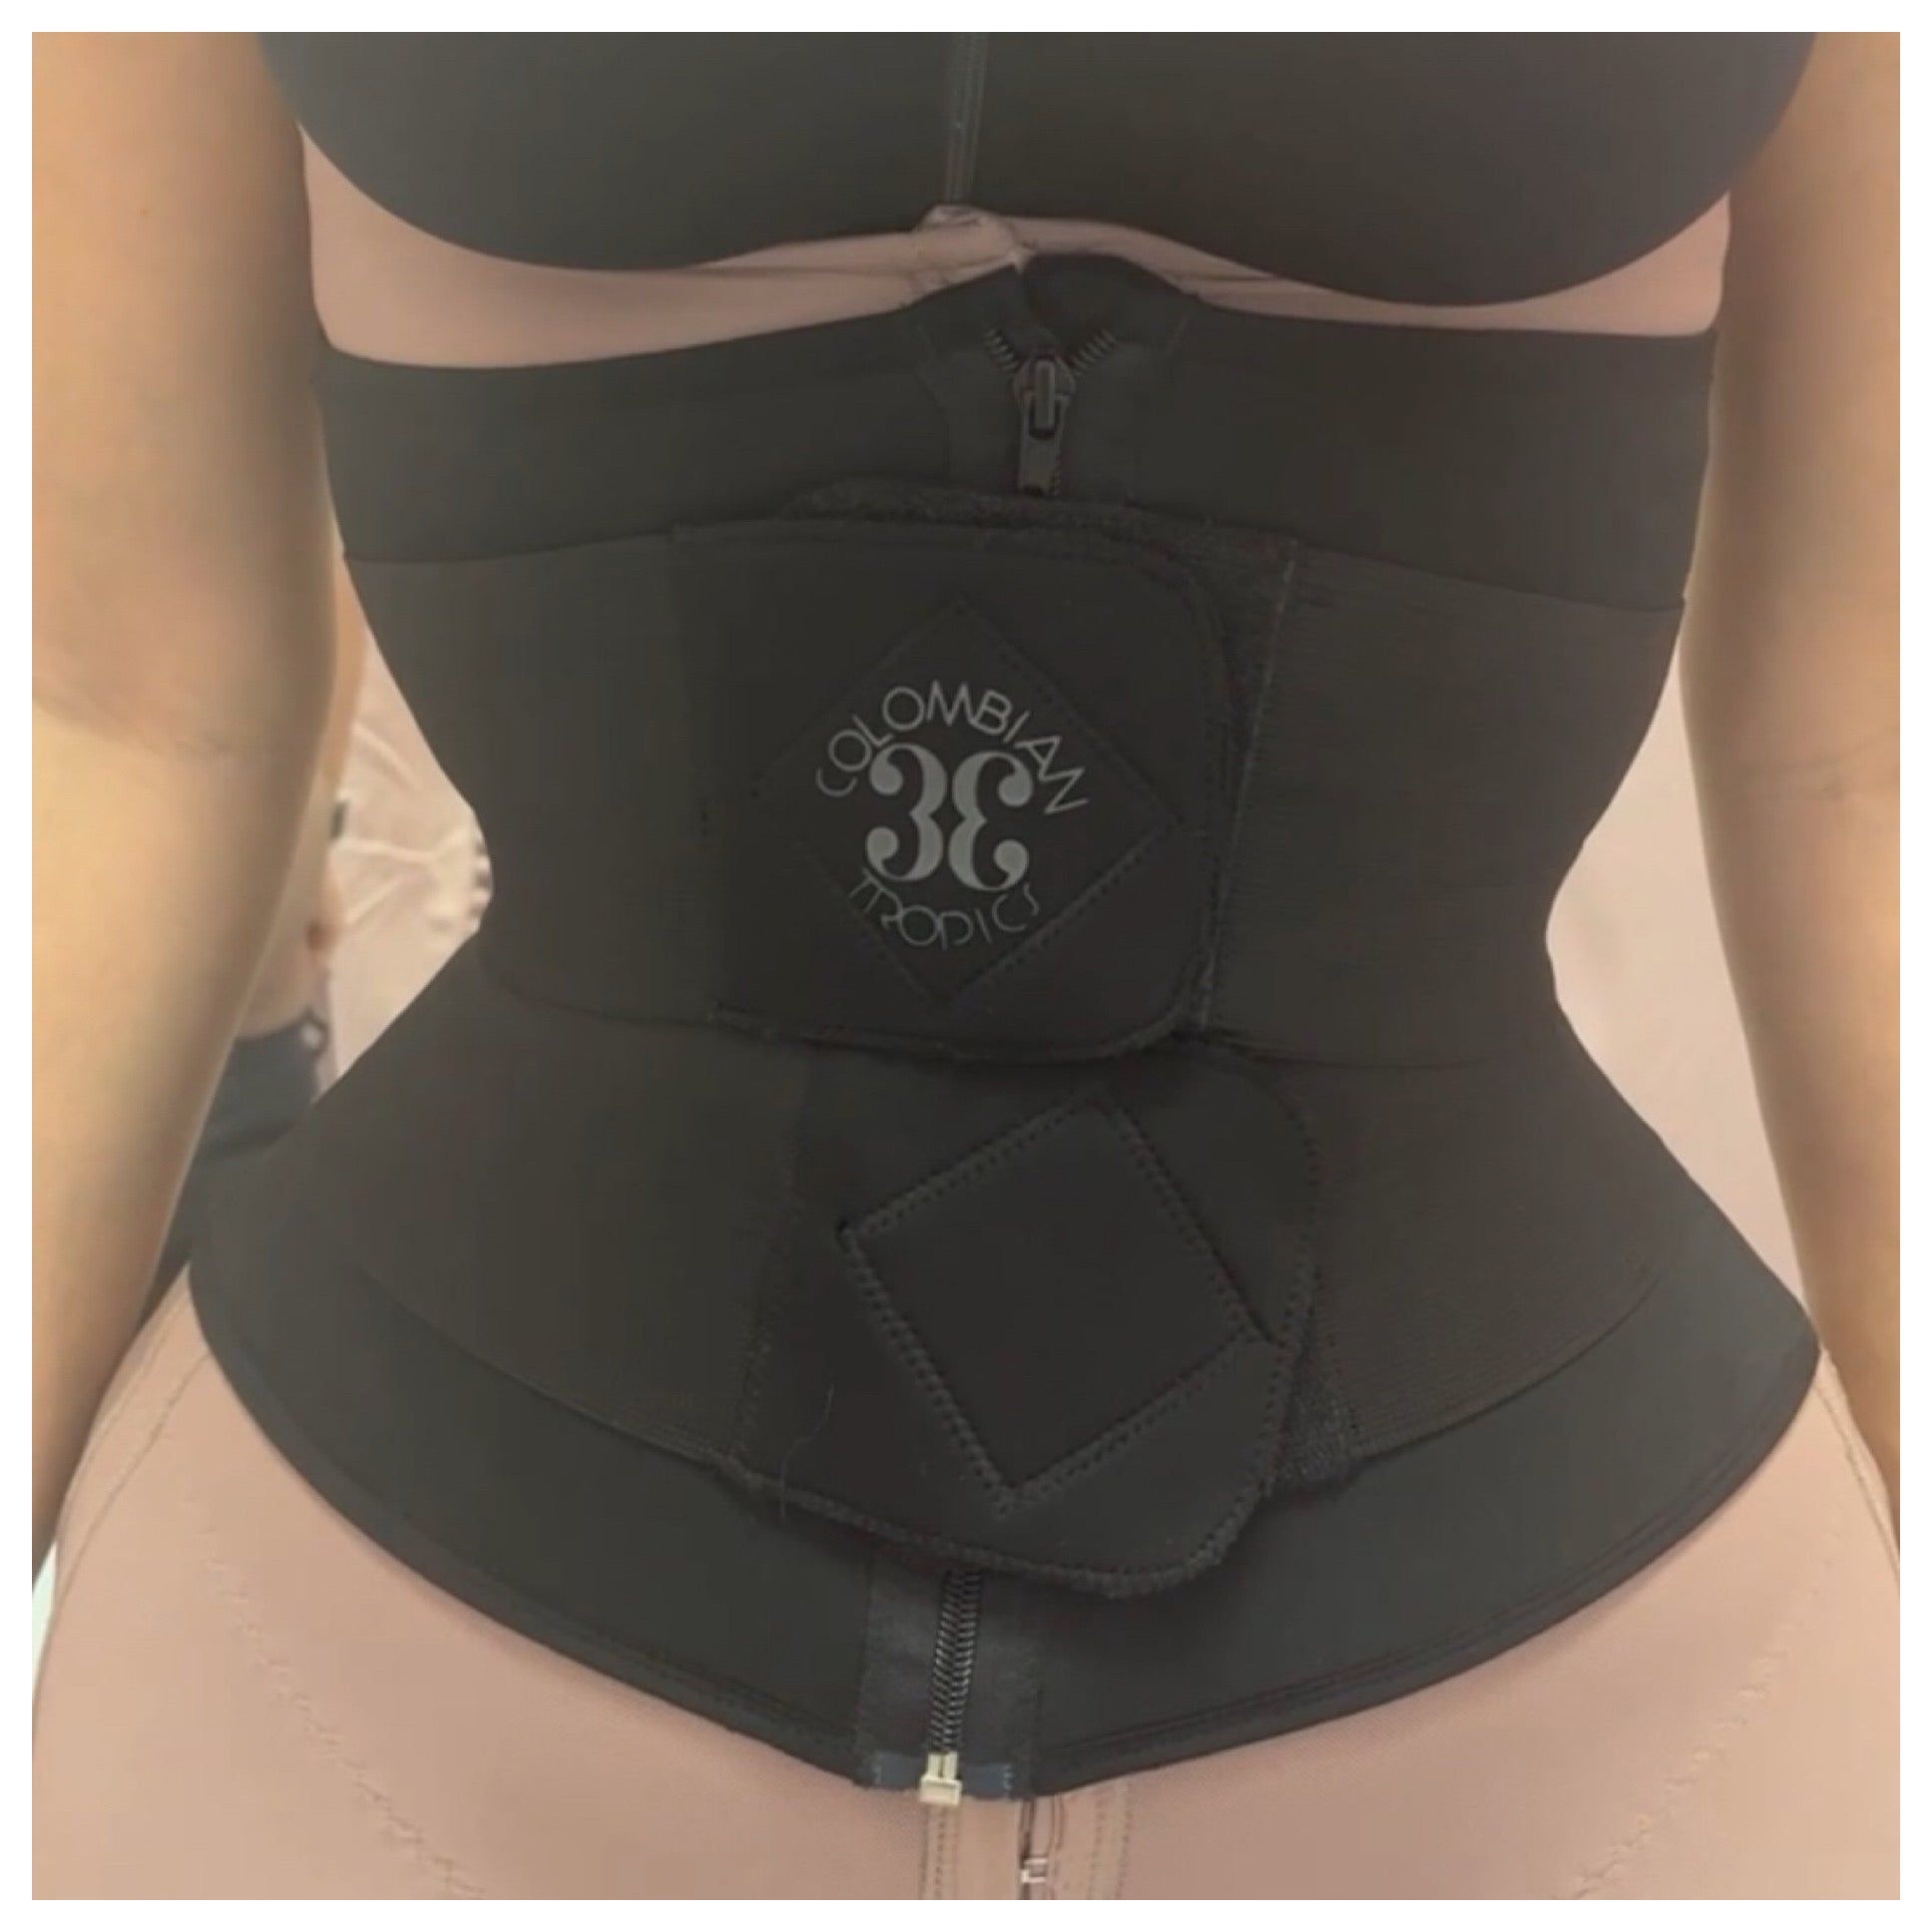 Fajas Colombian Girdle Waist Trainer Double Compression Bbl Shorts